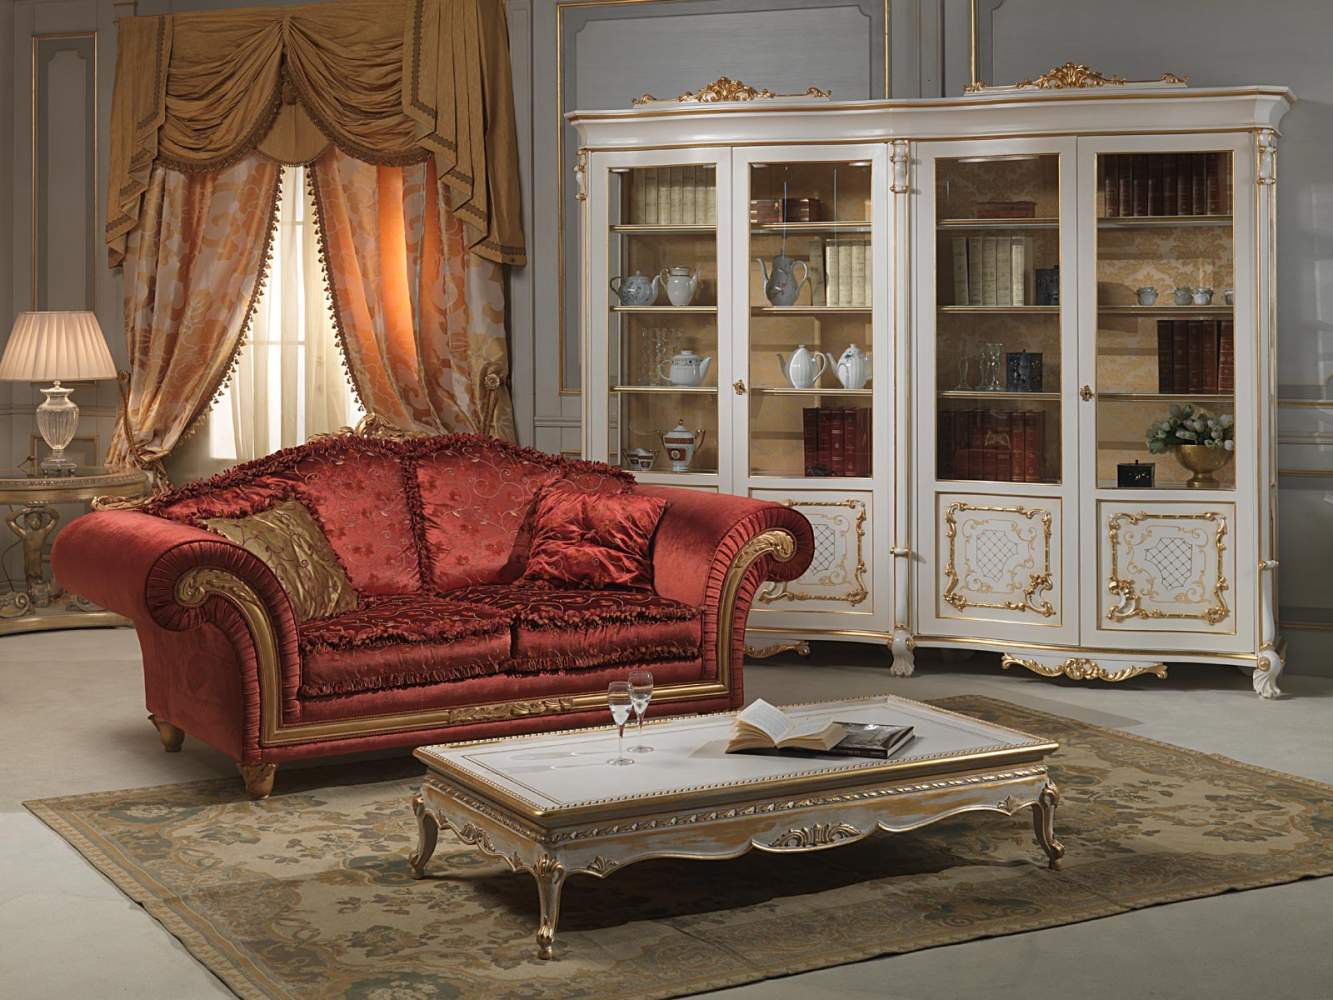 Living room with Venice glass showcase in Louis XV style